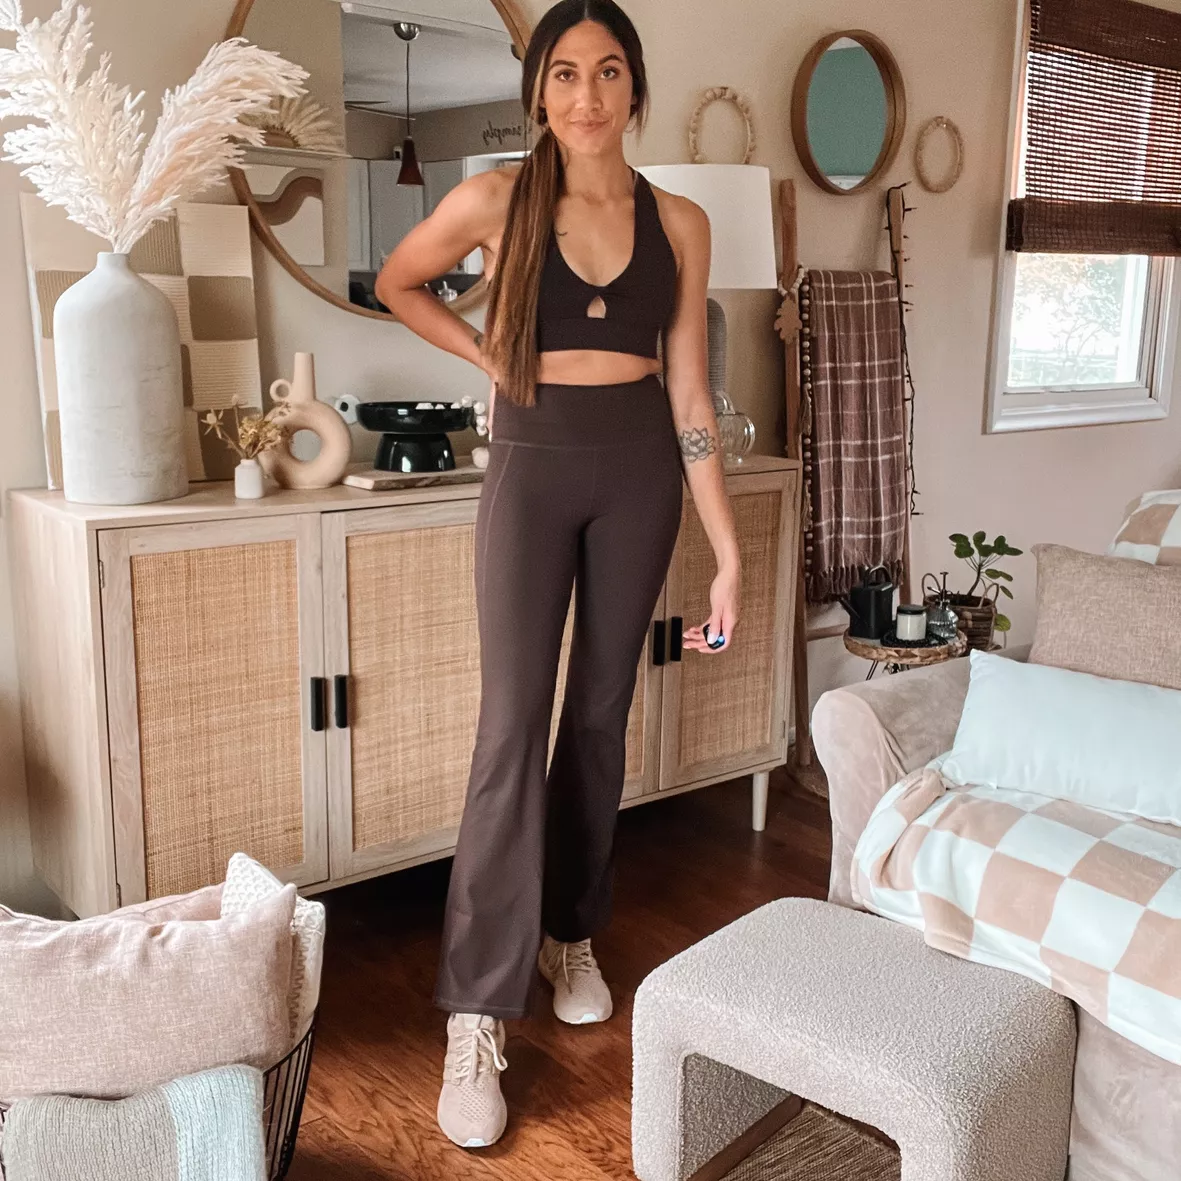 Oasis PureLuxe High-Waisted Kick Flare Fabletics